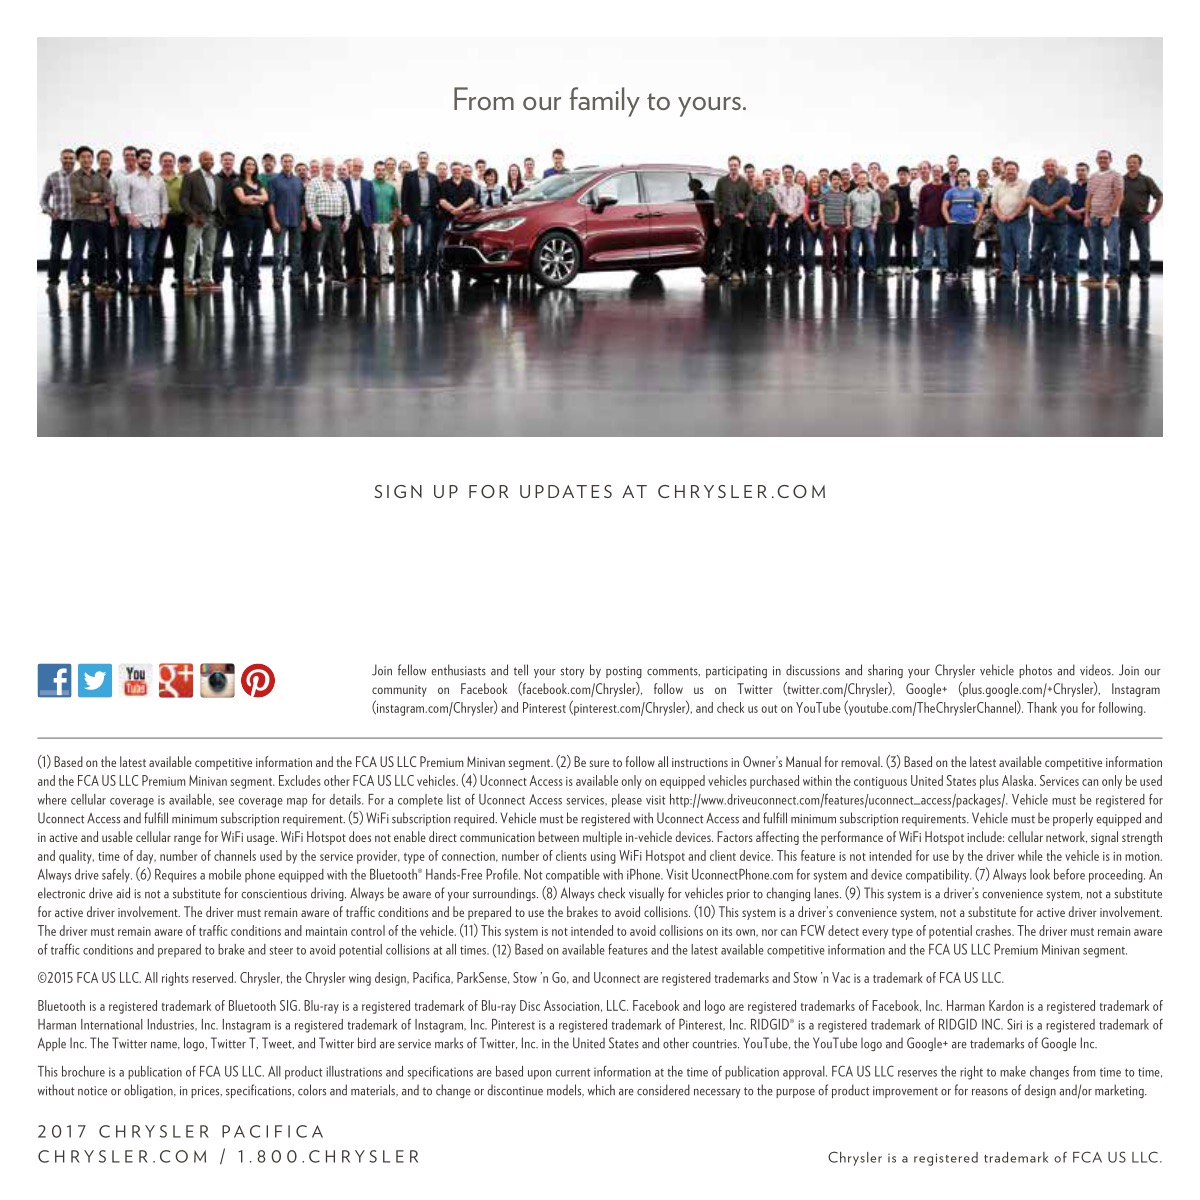 2017 Chrysler Pacifica Brochure Page 6